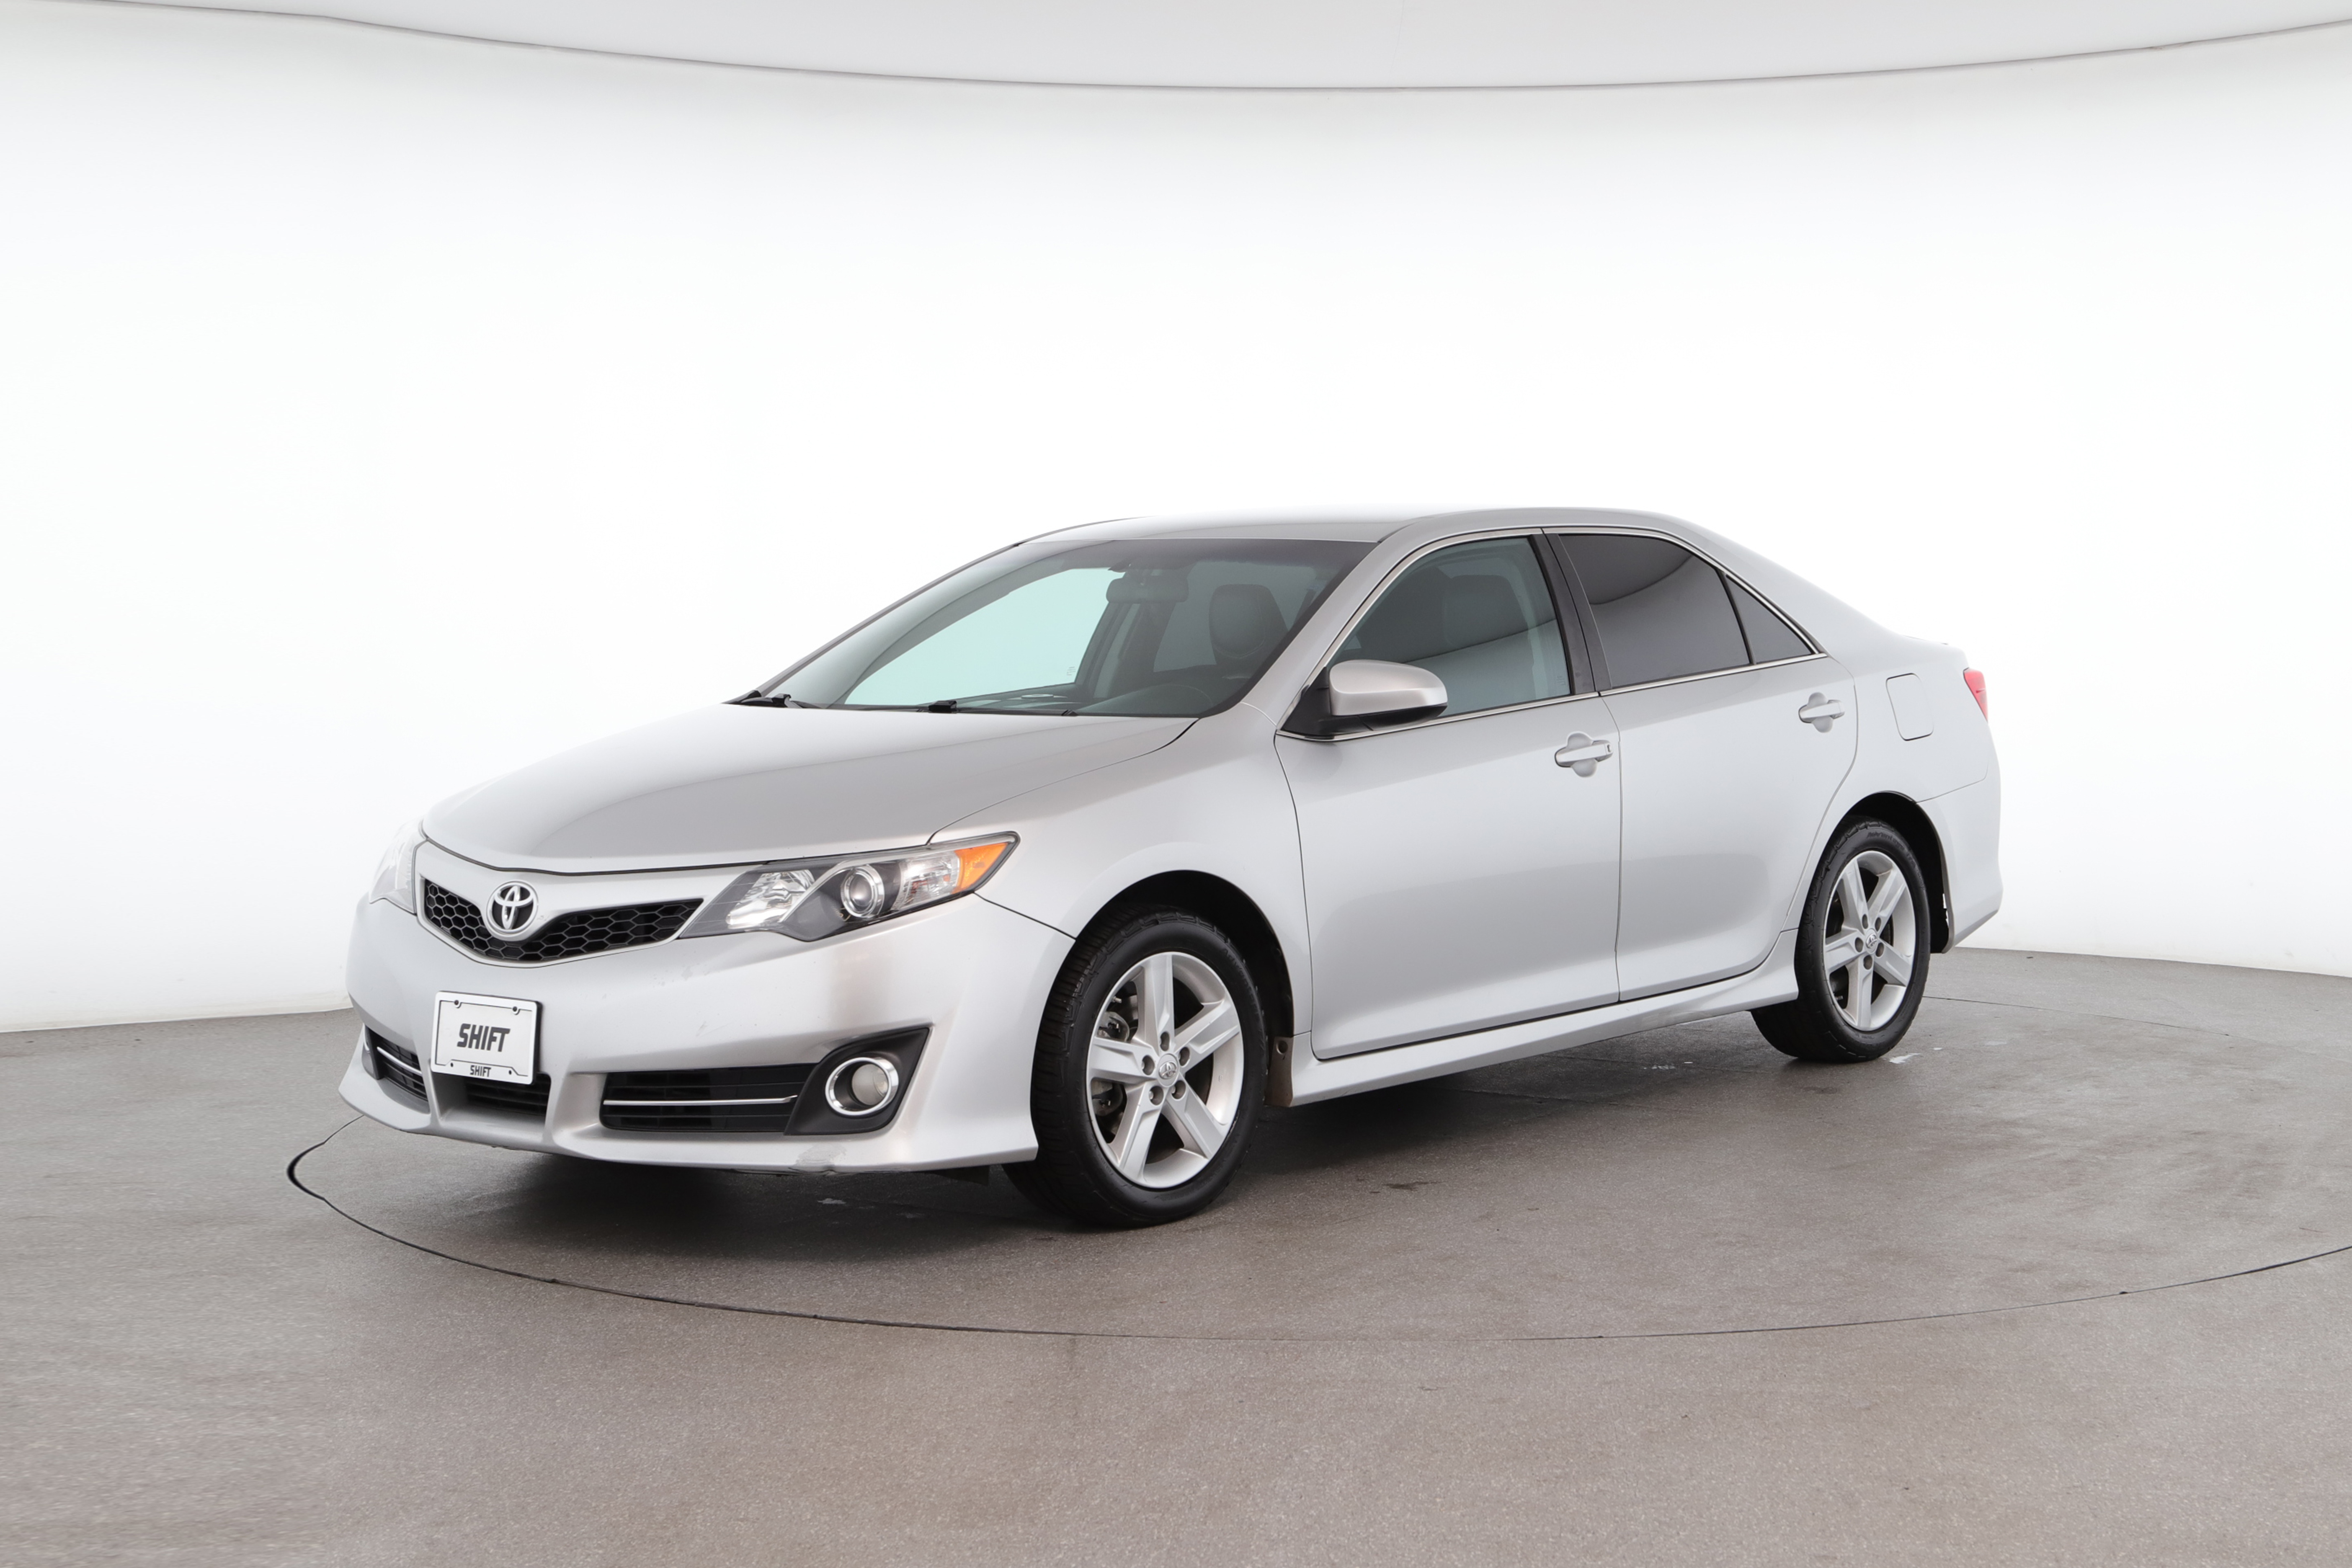 Used 2013 Silver Toyota Camry for $12,950